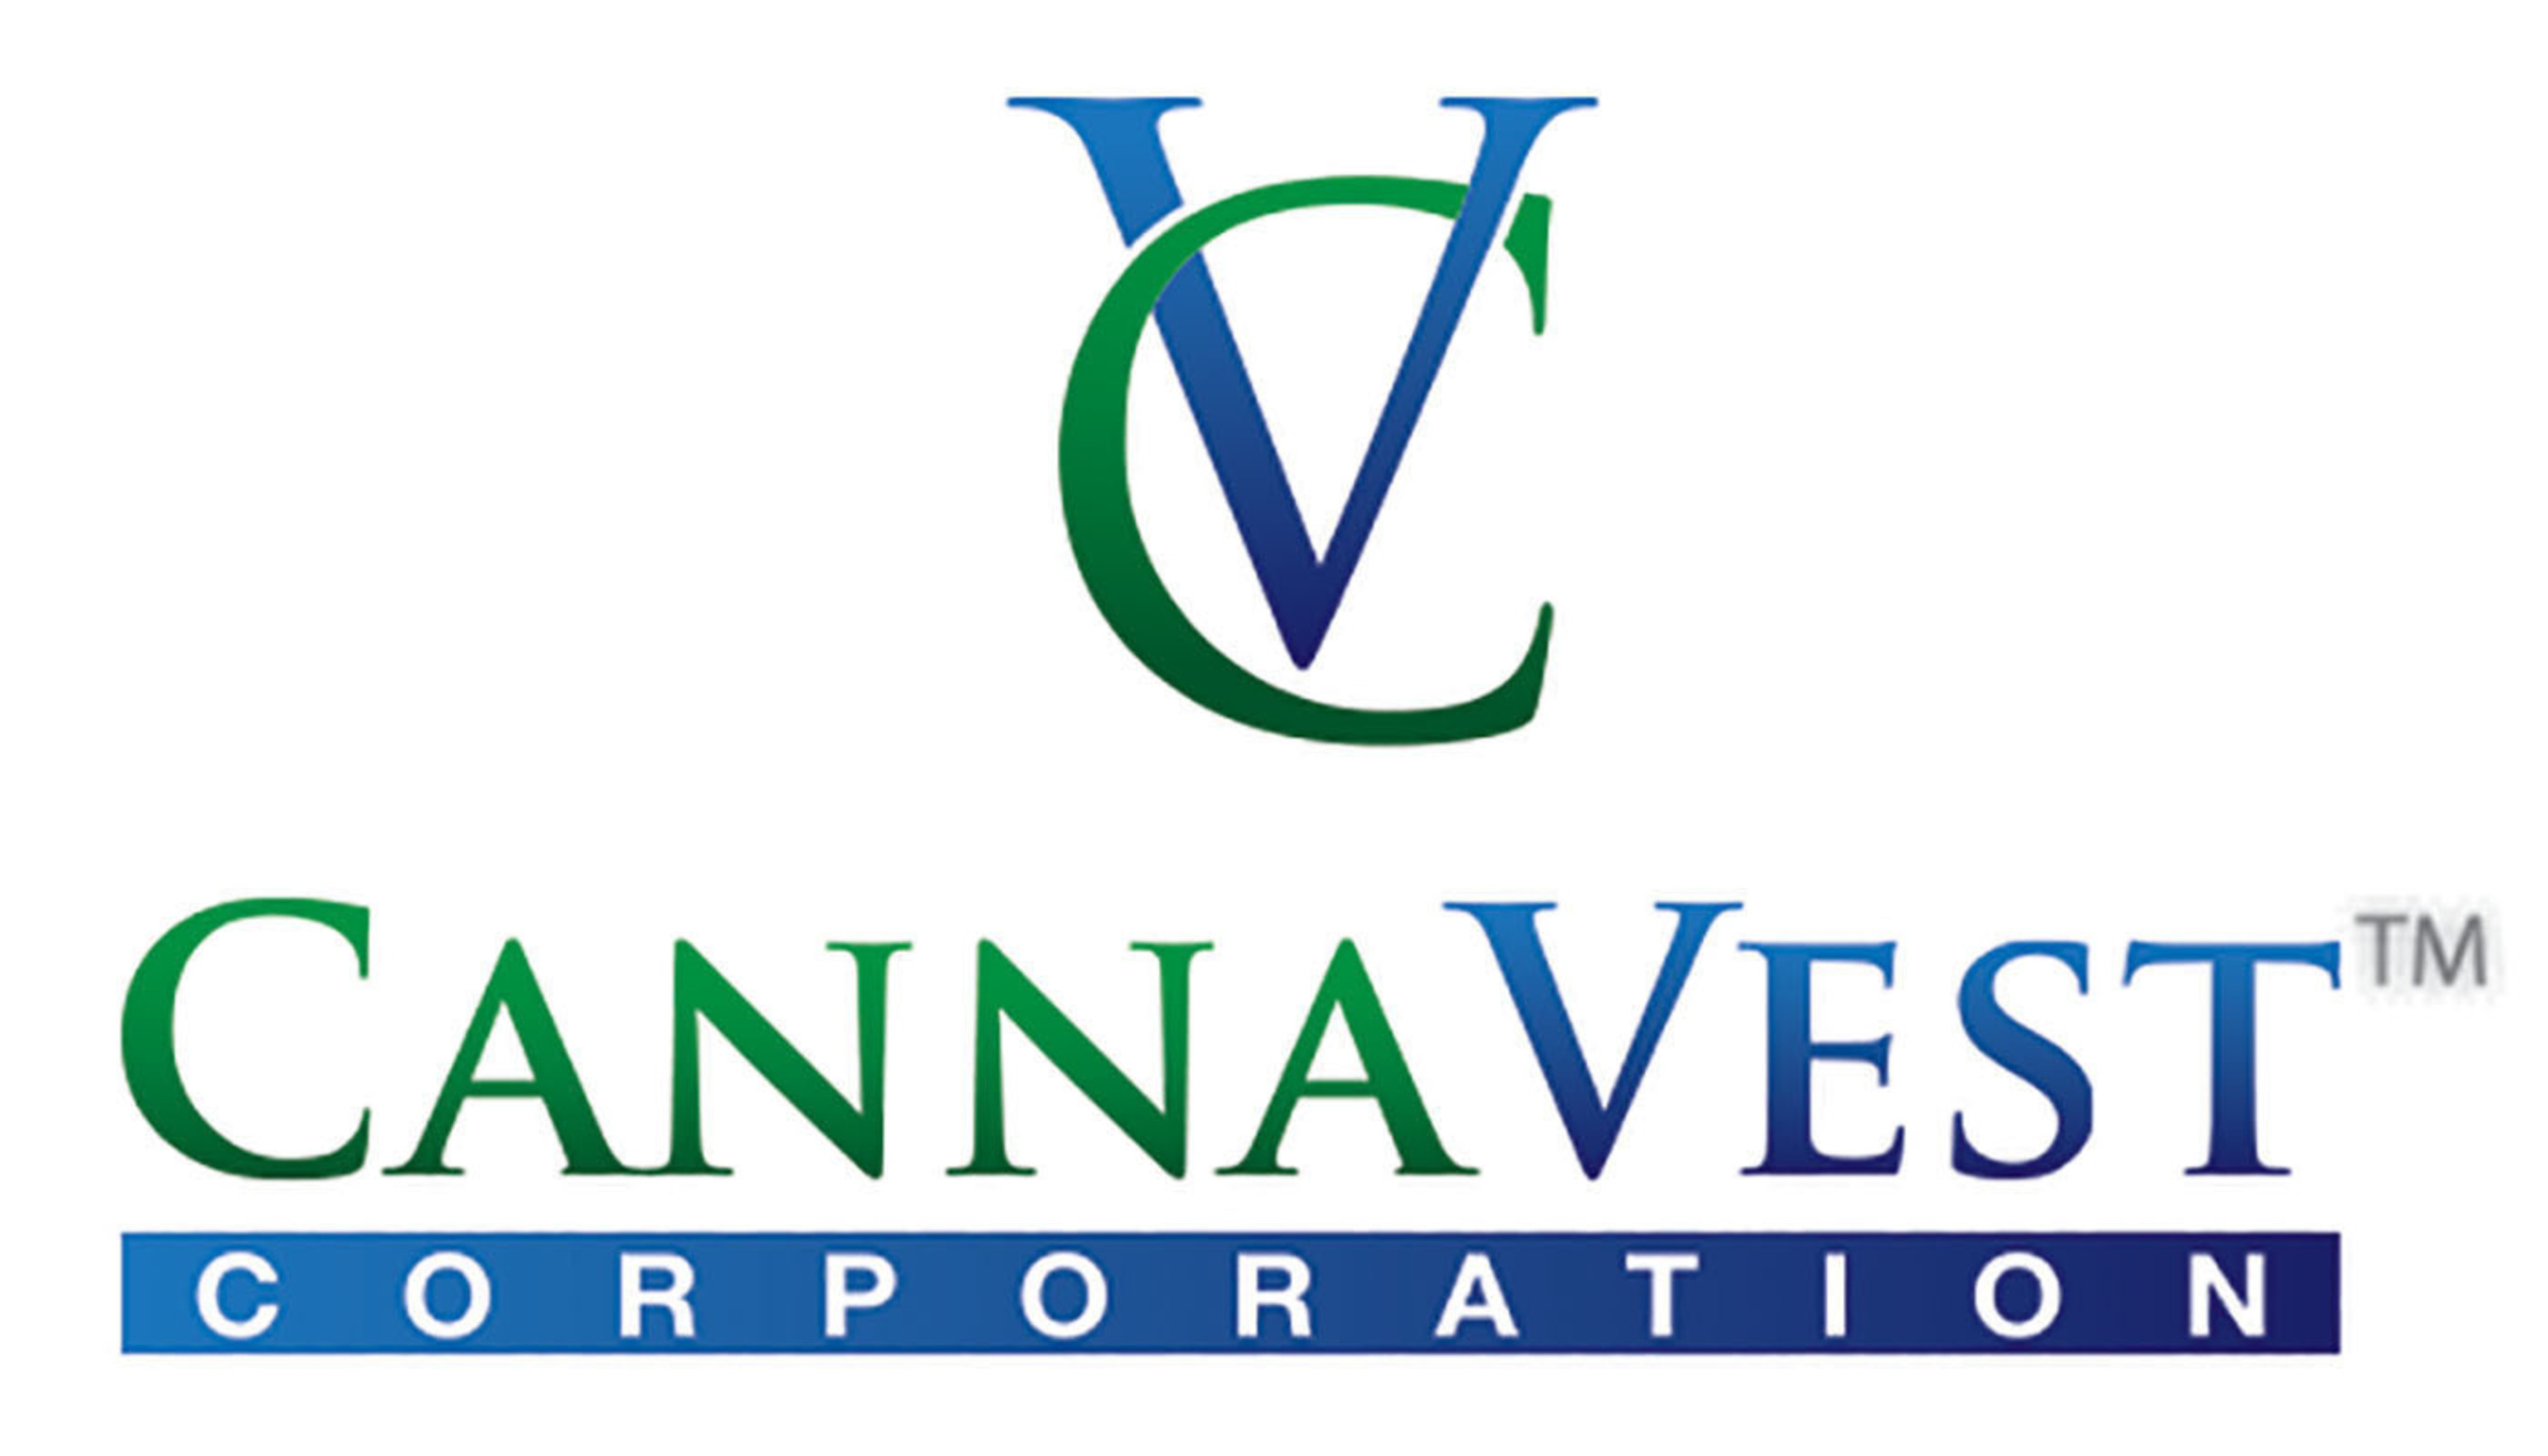 CannaVest Corp - The World's Leading Industrial Hemp Supplier.